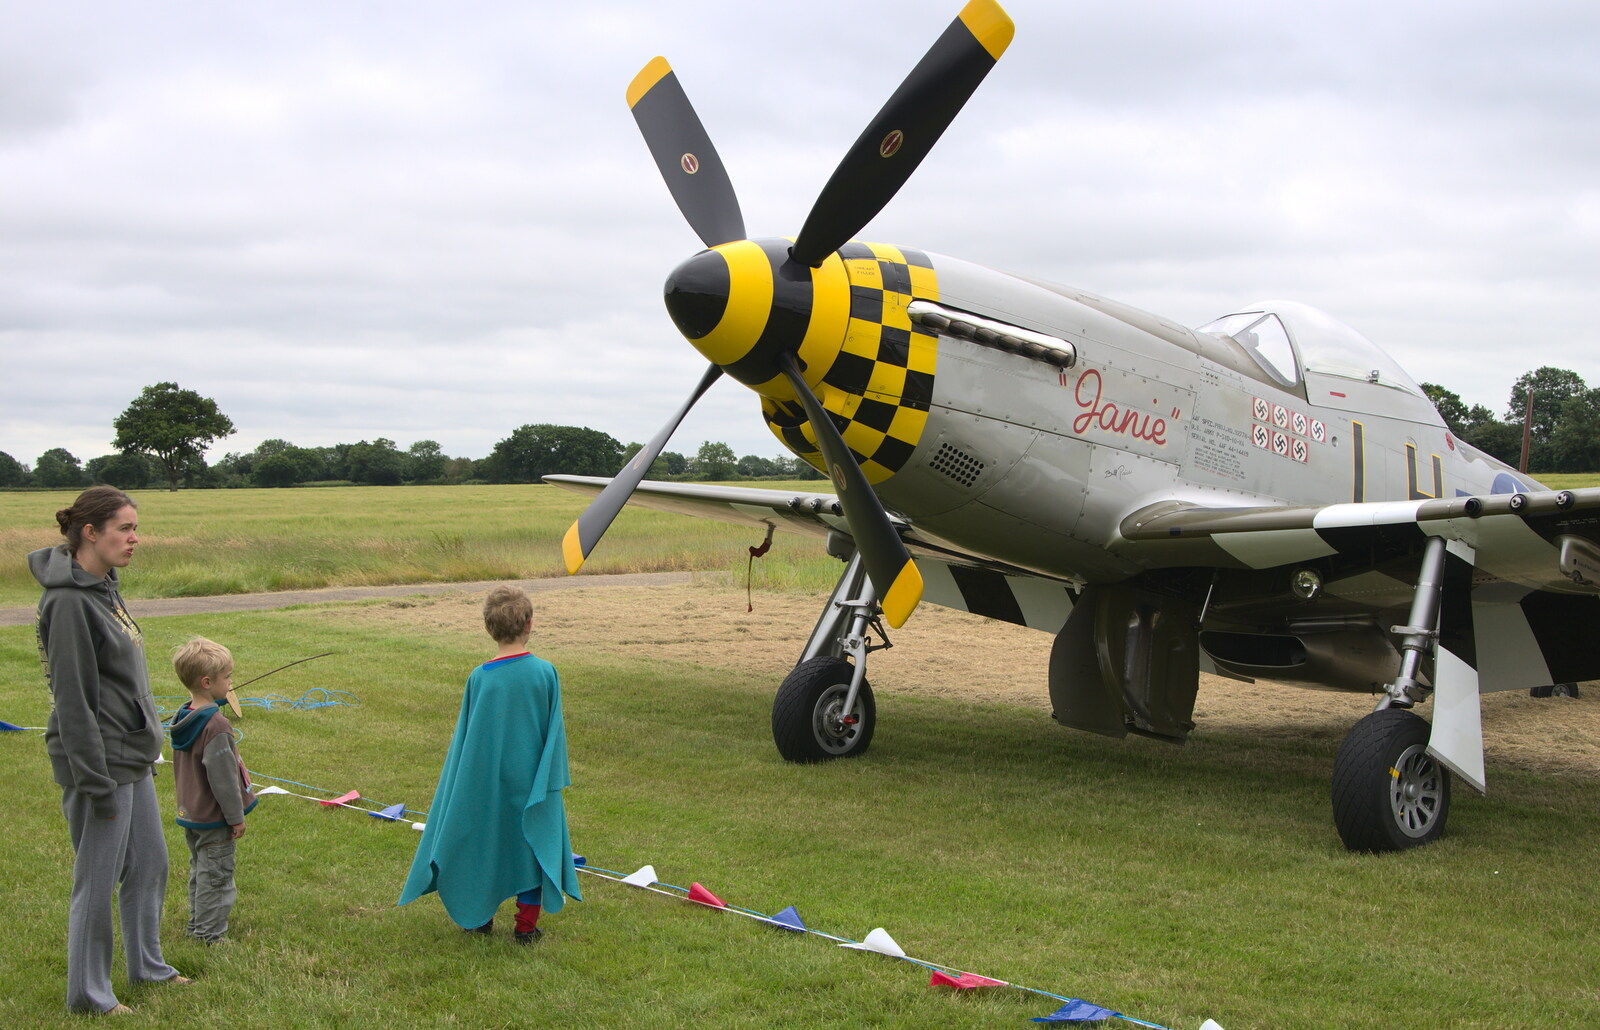 Looking at Janie in the morning from "Our Little Friends" Warbirds Hangar Dance, Hardwick, Norfolk - 9th July 2016